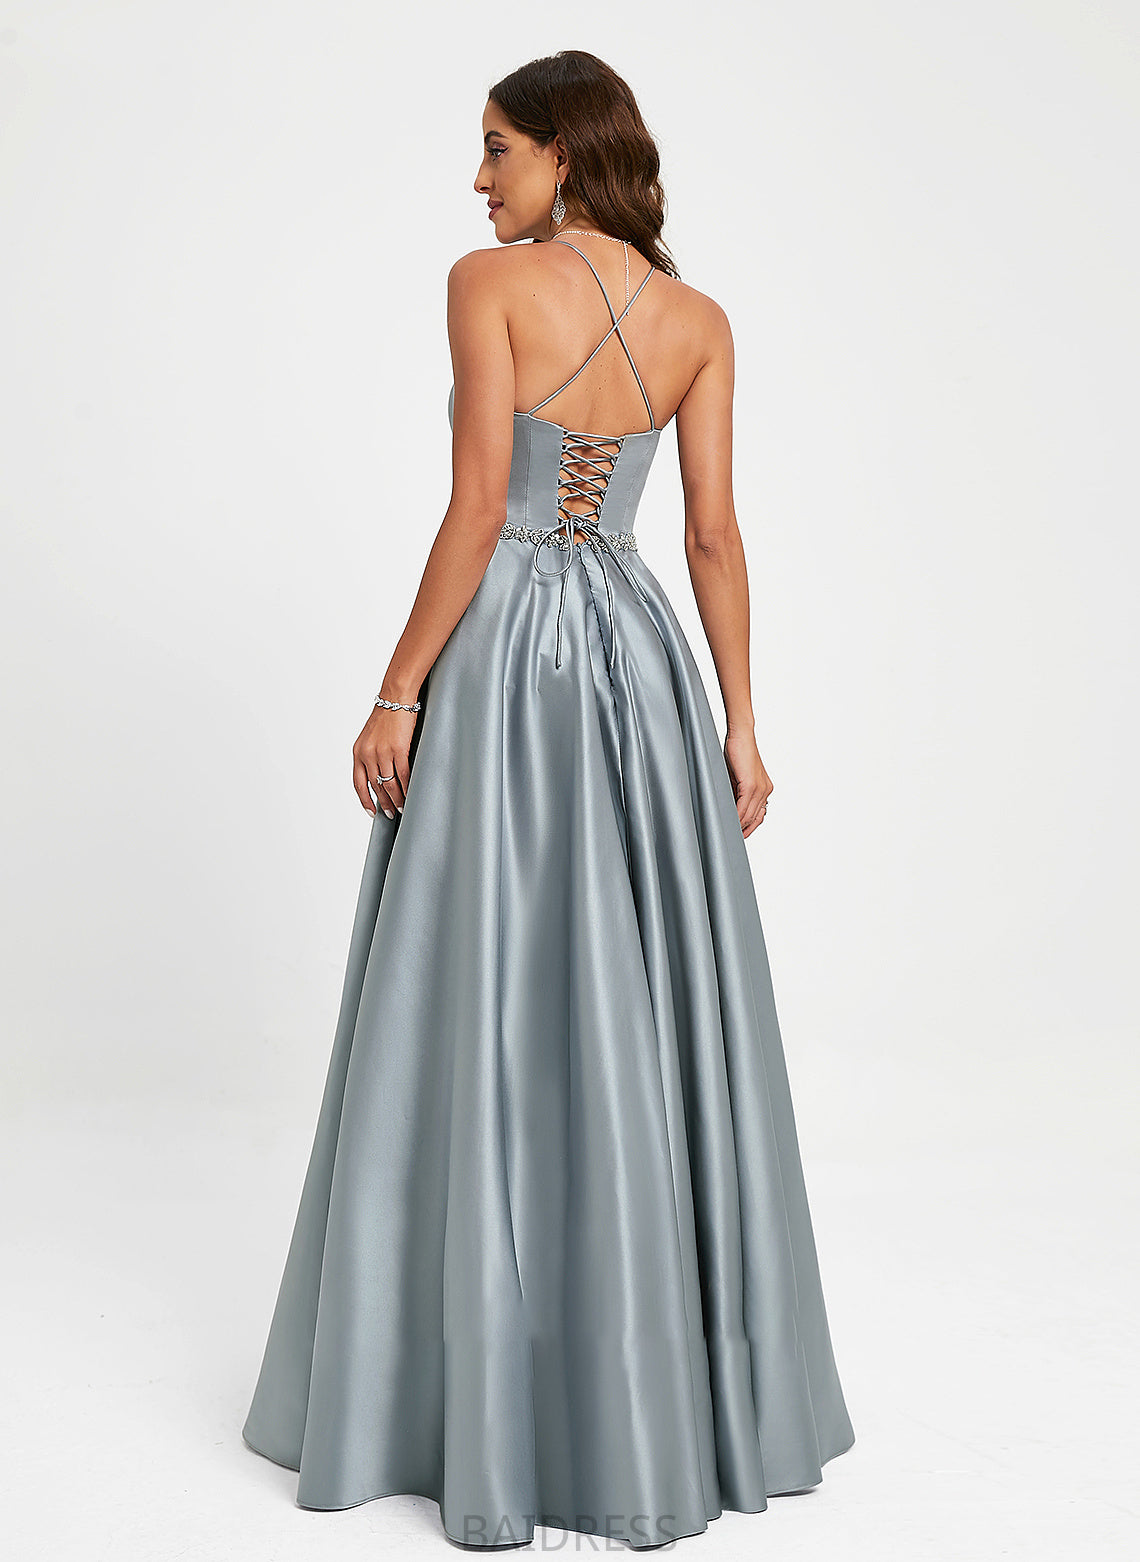 Satin Beading Leilani Neck With Prom Dresses A-Line Scoop Floor-Length